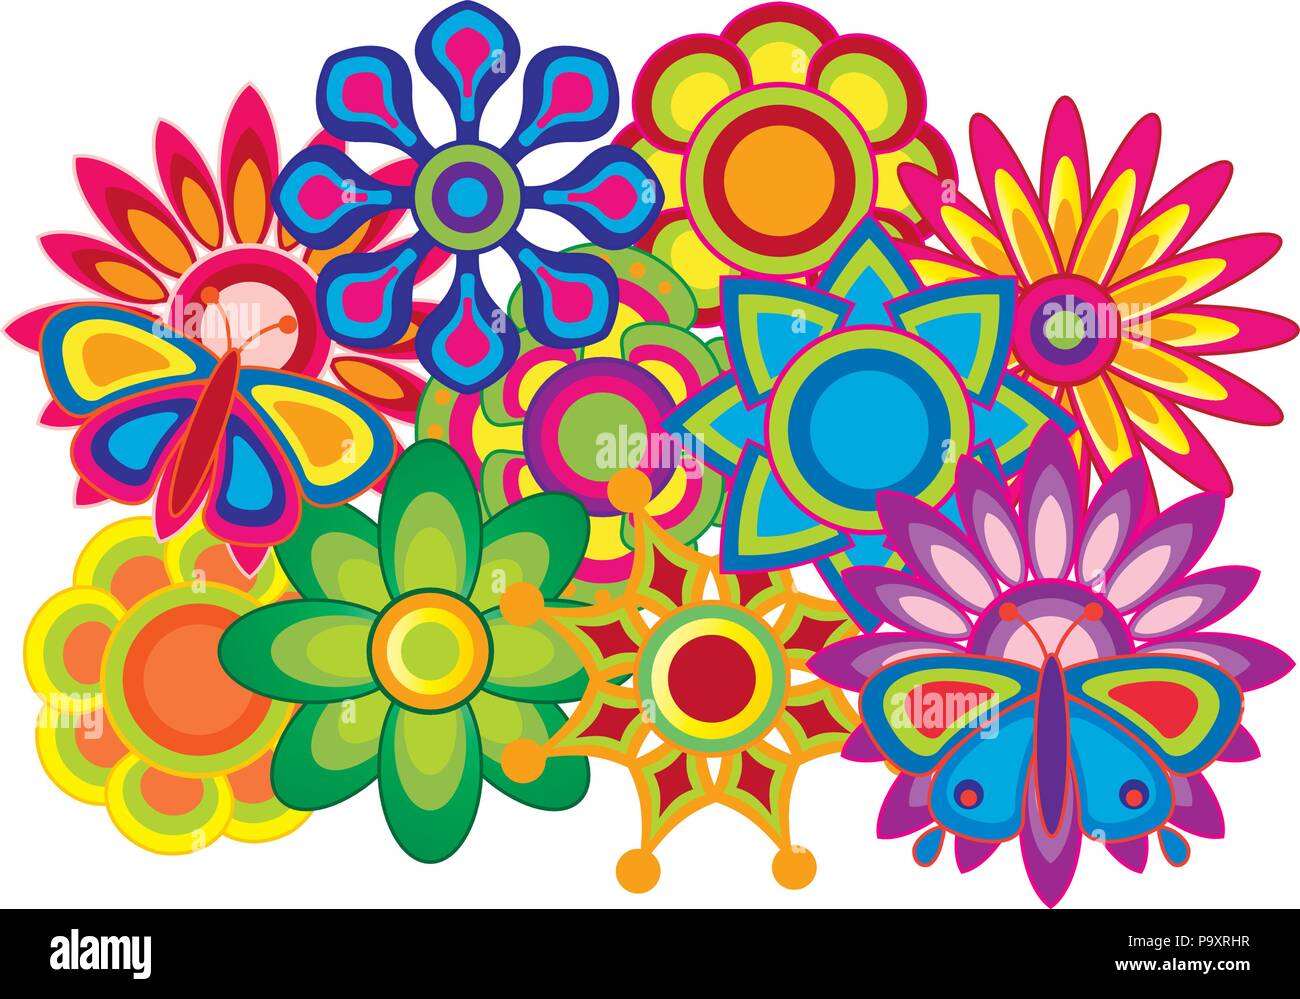 Colorful Wildflowers Stock Vector Images - Alamy